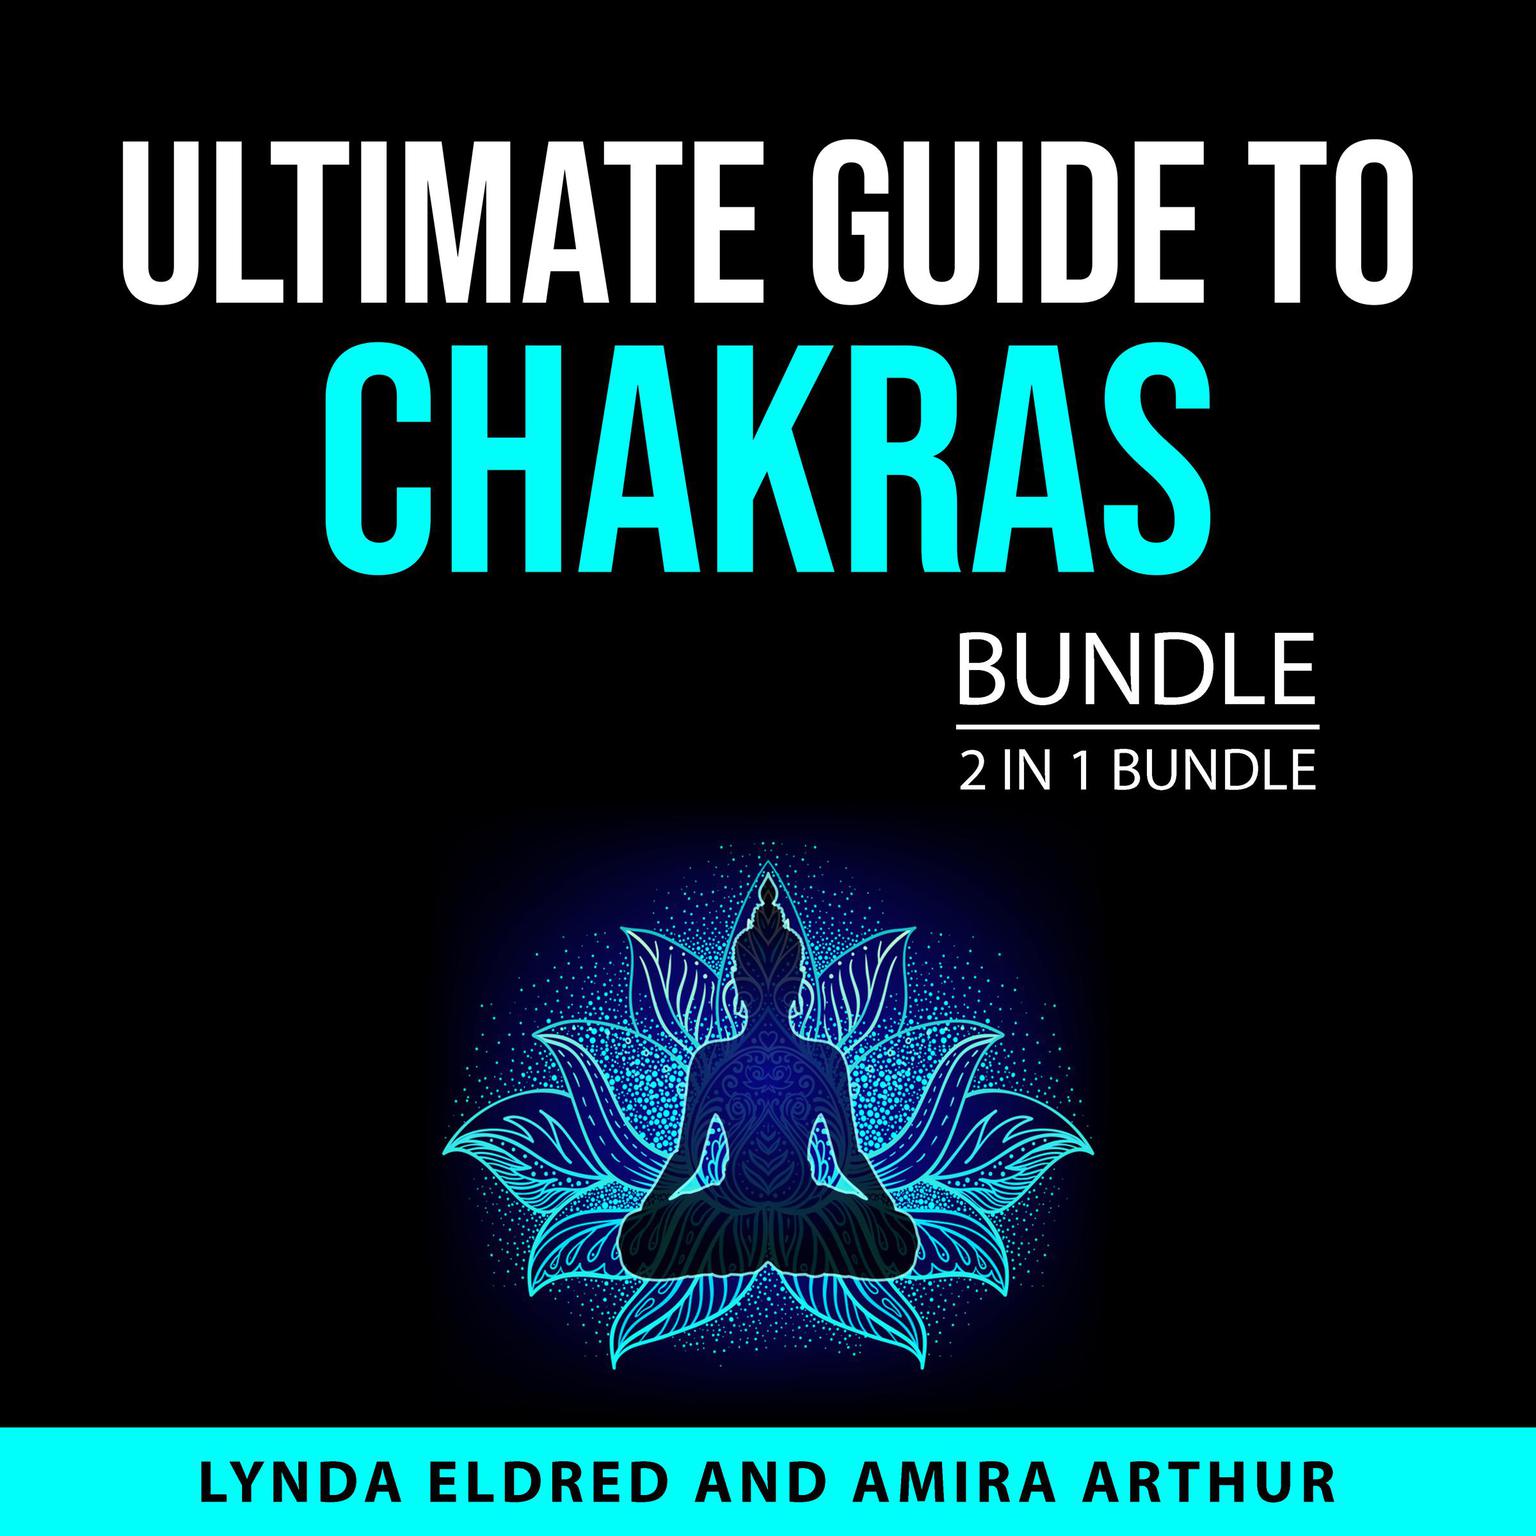 Ultimate Guide to Chakras Bundle, 2 in 1 Bundle Audiobook, by Amira Arthur